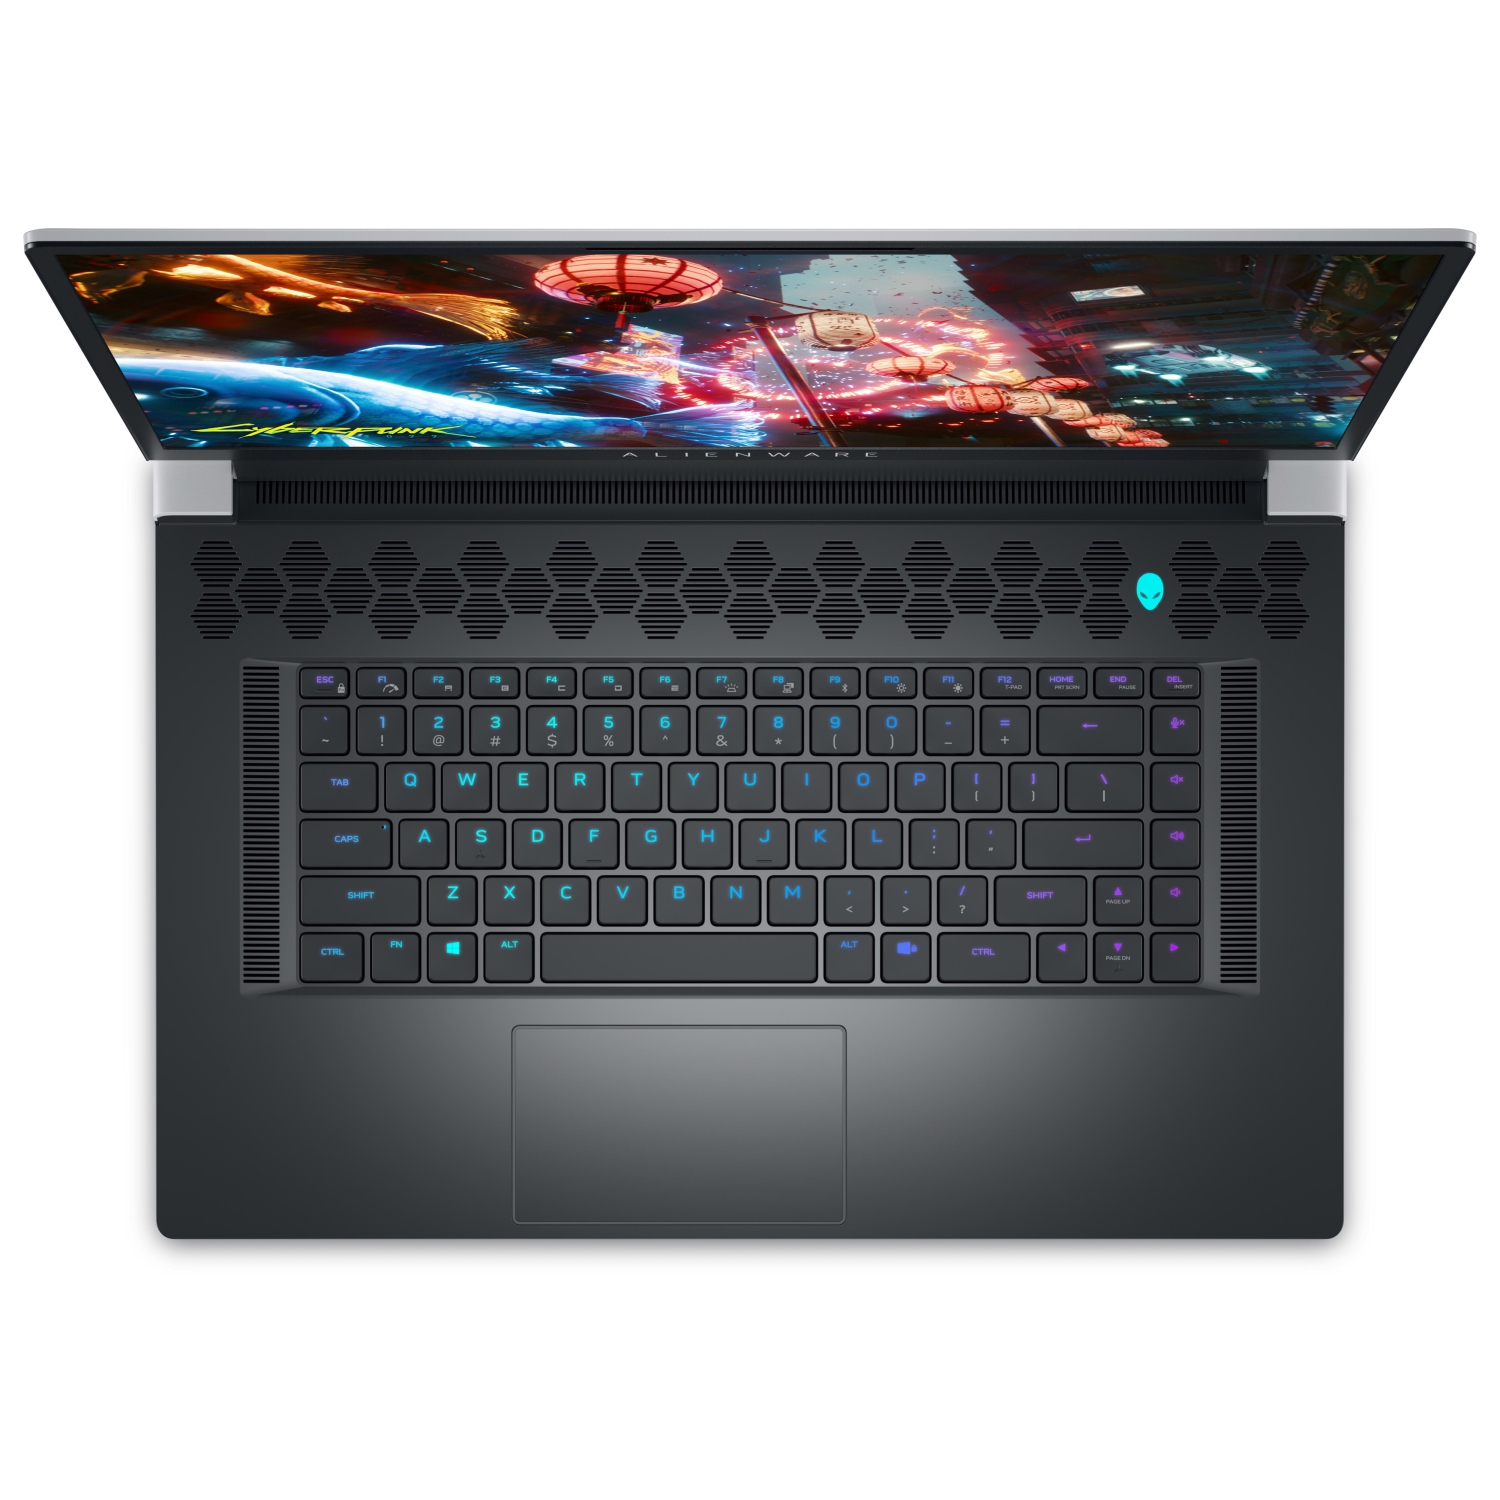 Refurbished (Excellent) – Dell Alienware X17 R2 Gaming Laptop (2022) | 17.3" FHD | Core i7 - 2TB SSD - 64GB RAM - 3080 Ti | 14 Cores @ 4.7 GHz - 12th Gen CPU - 16GB GDDR6X